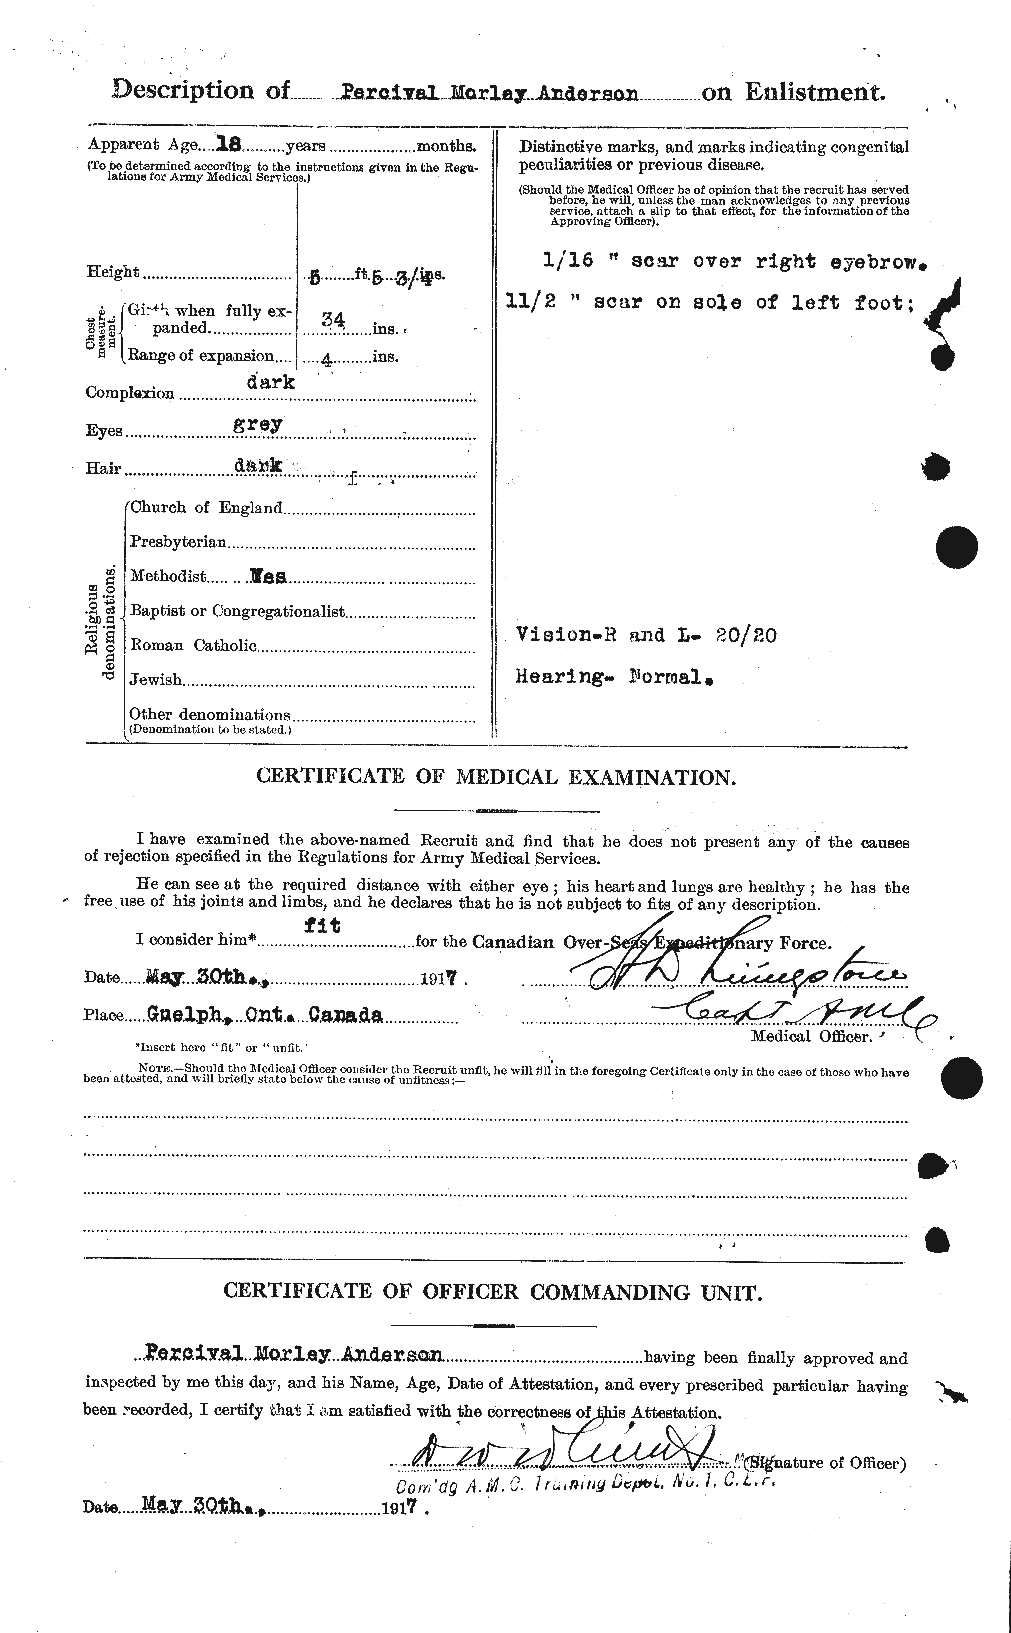 Personnel Records of the First World War - CEF 207362b